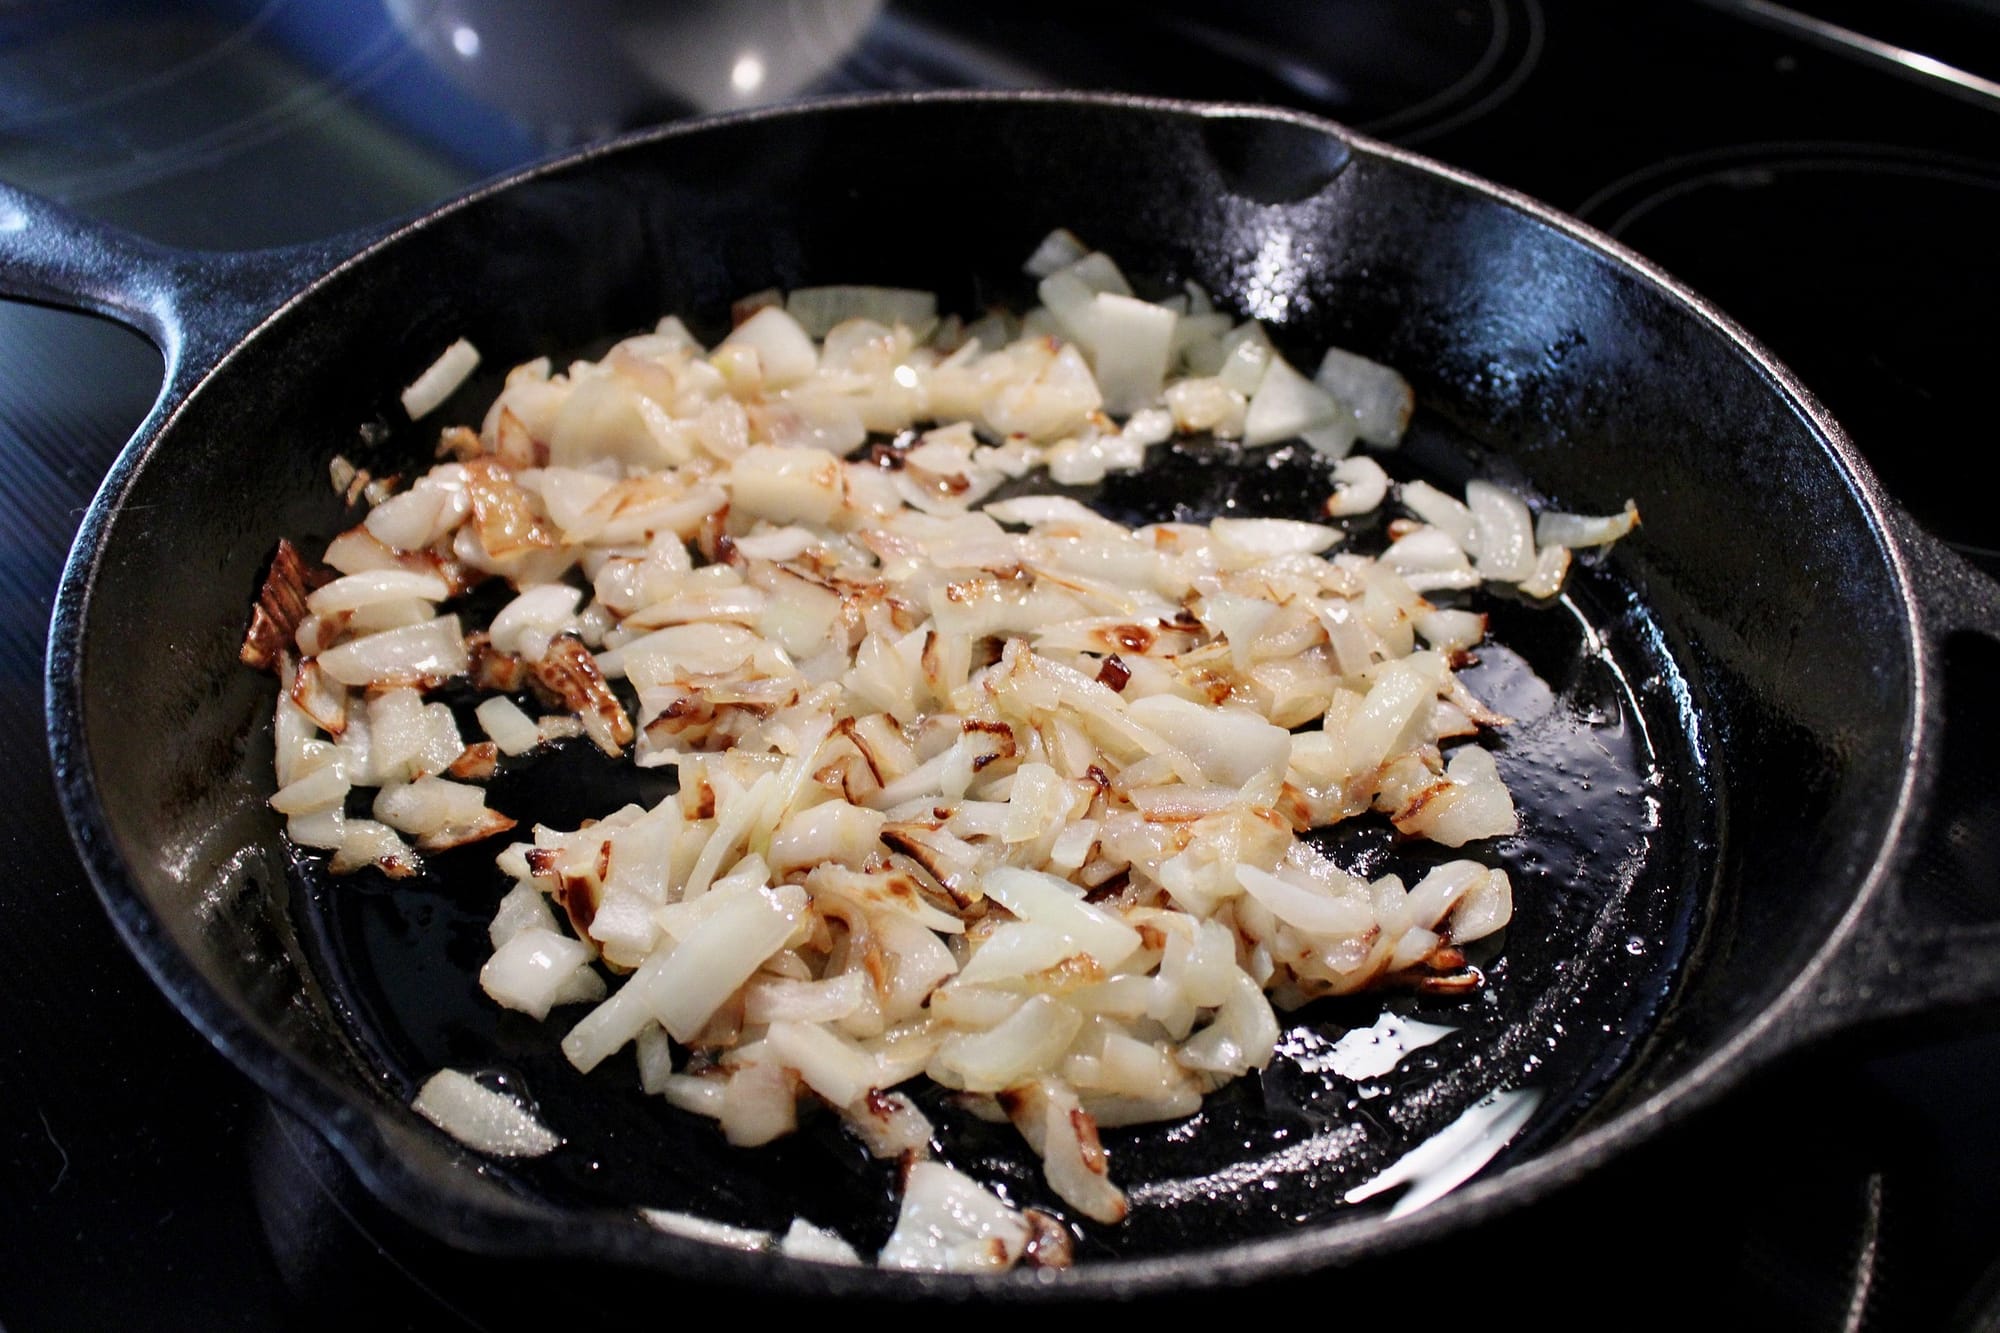 Onions sauteeing in a skillet for the lima beans.